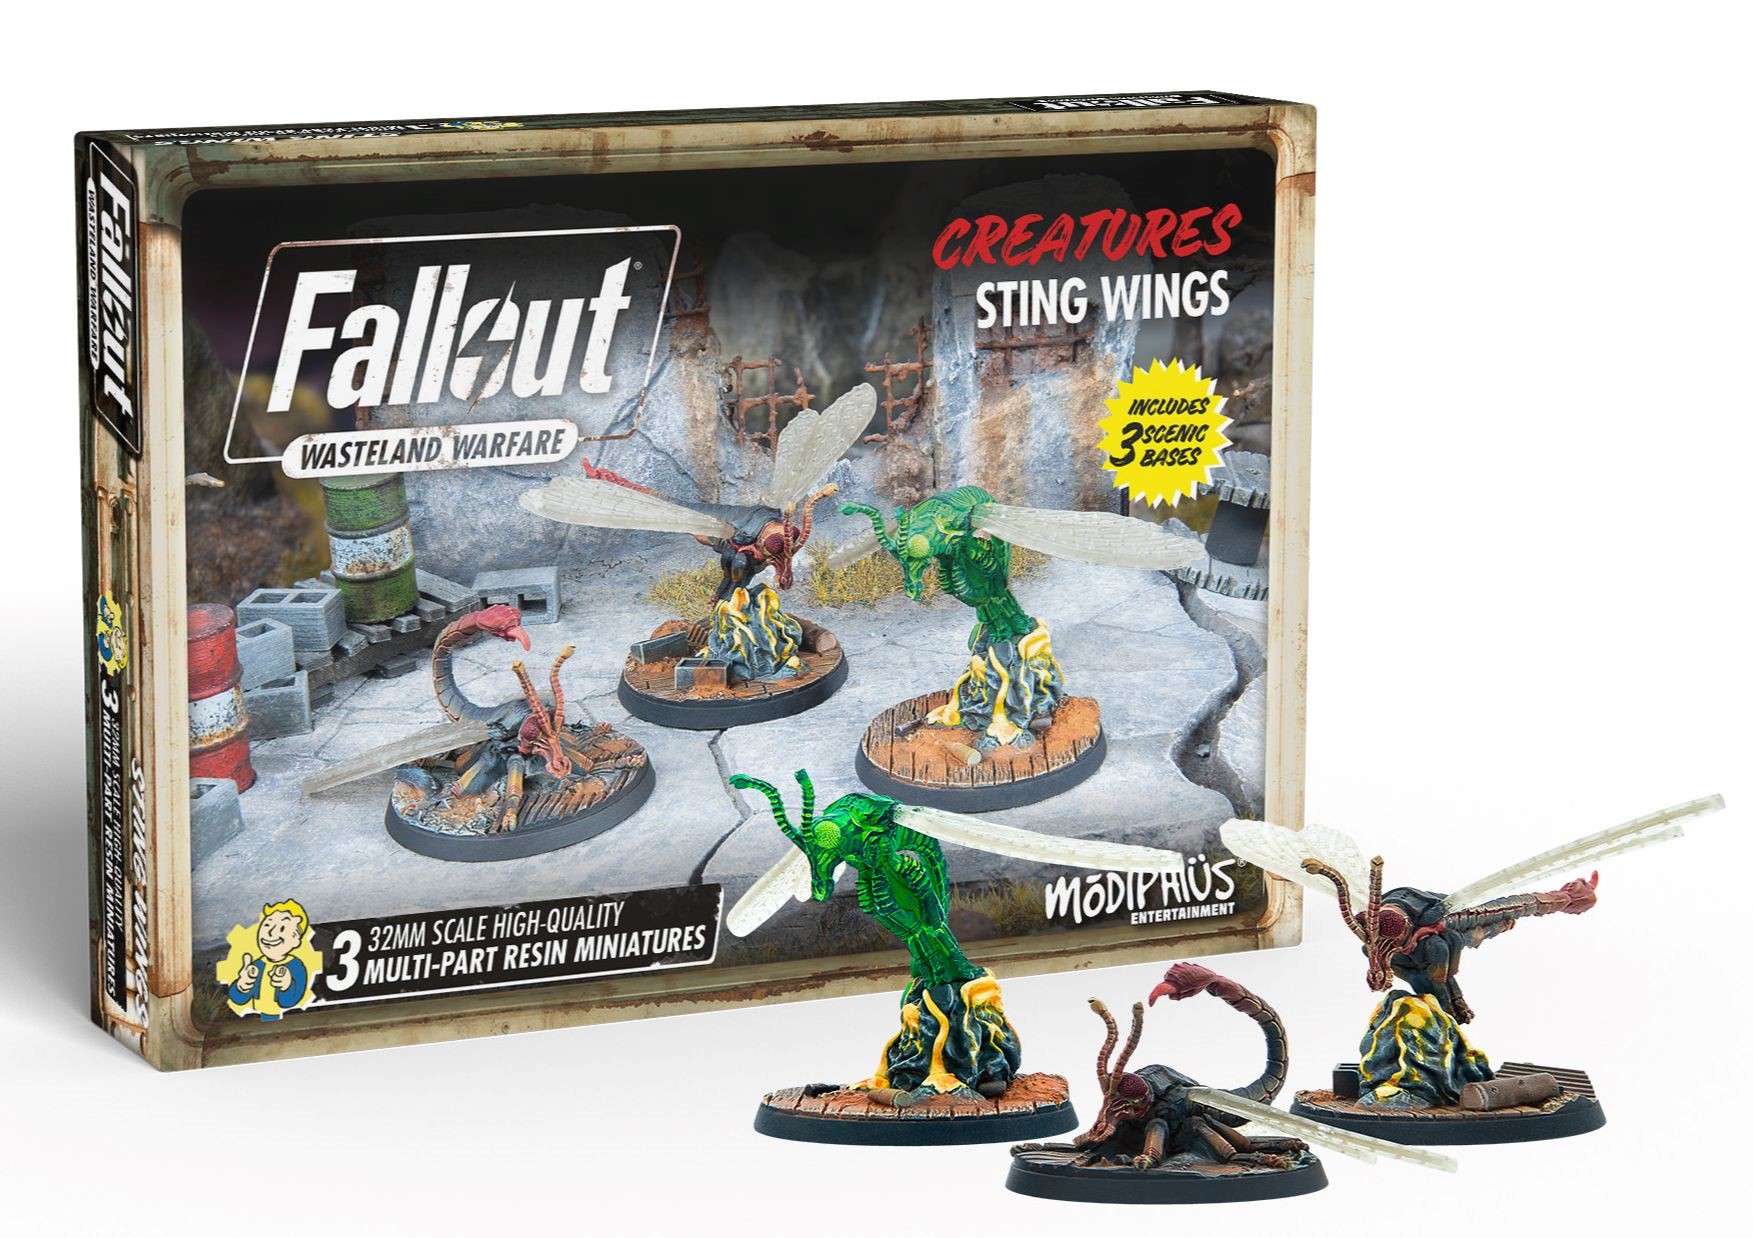 Fallout: Wasteland Warfare: Creatures: Sting Wings 